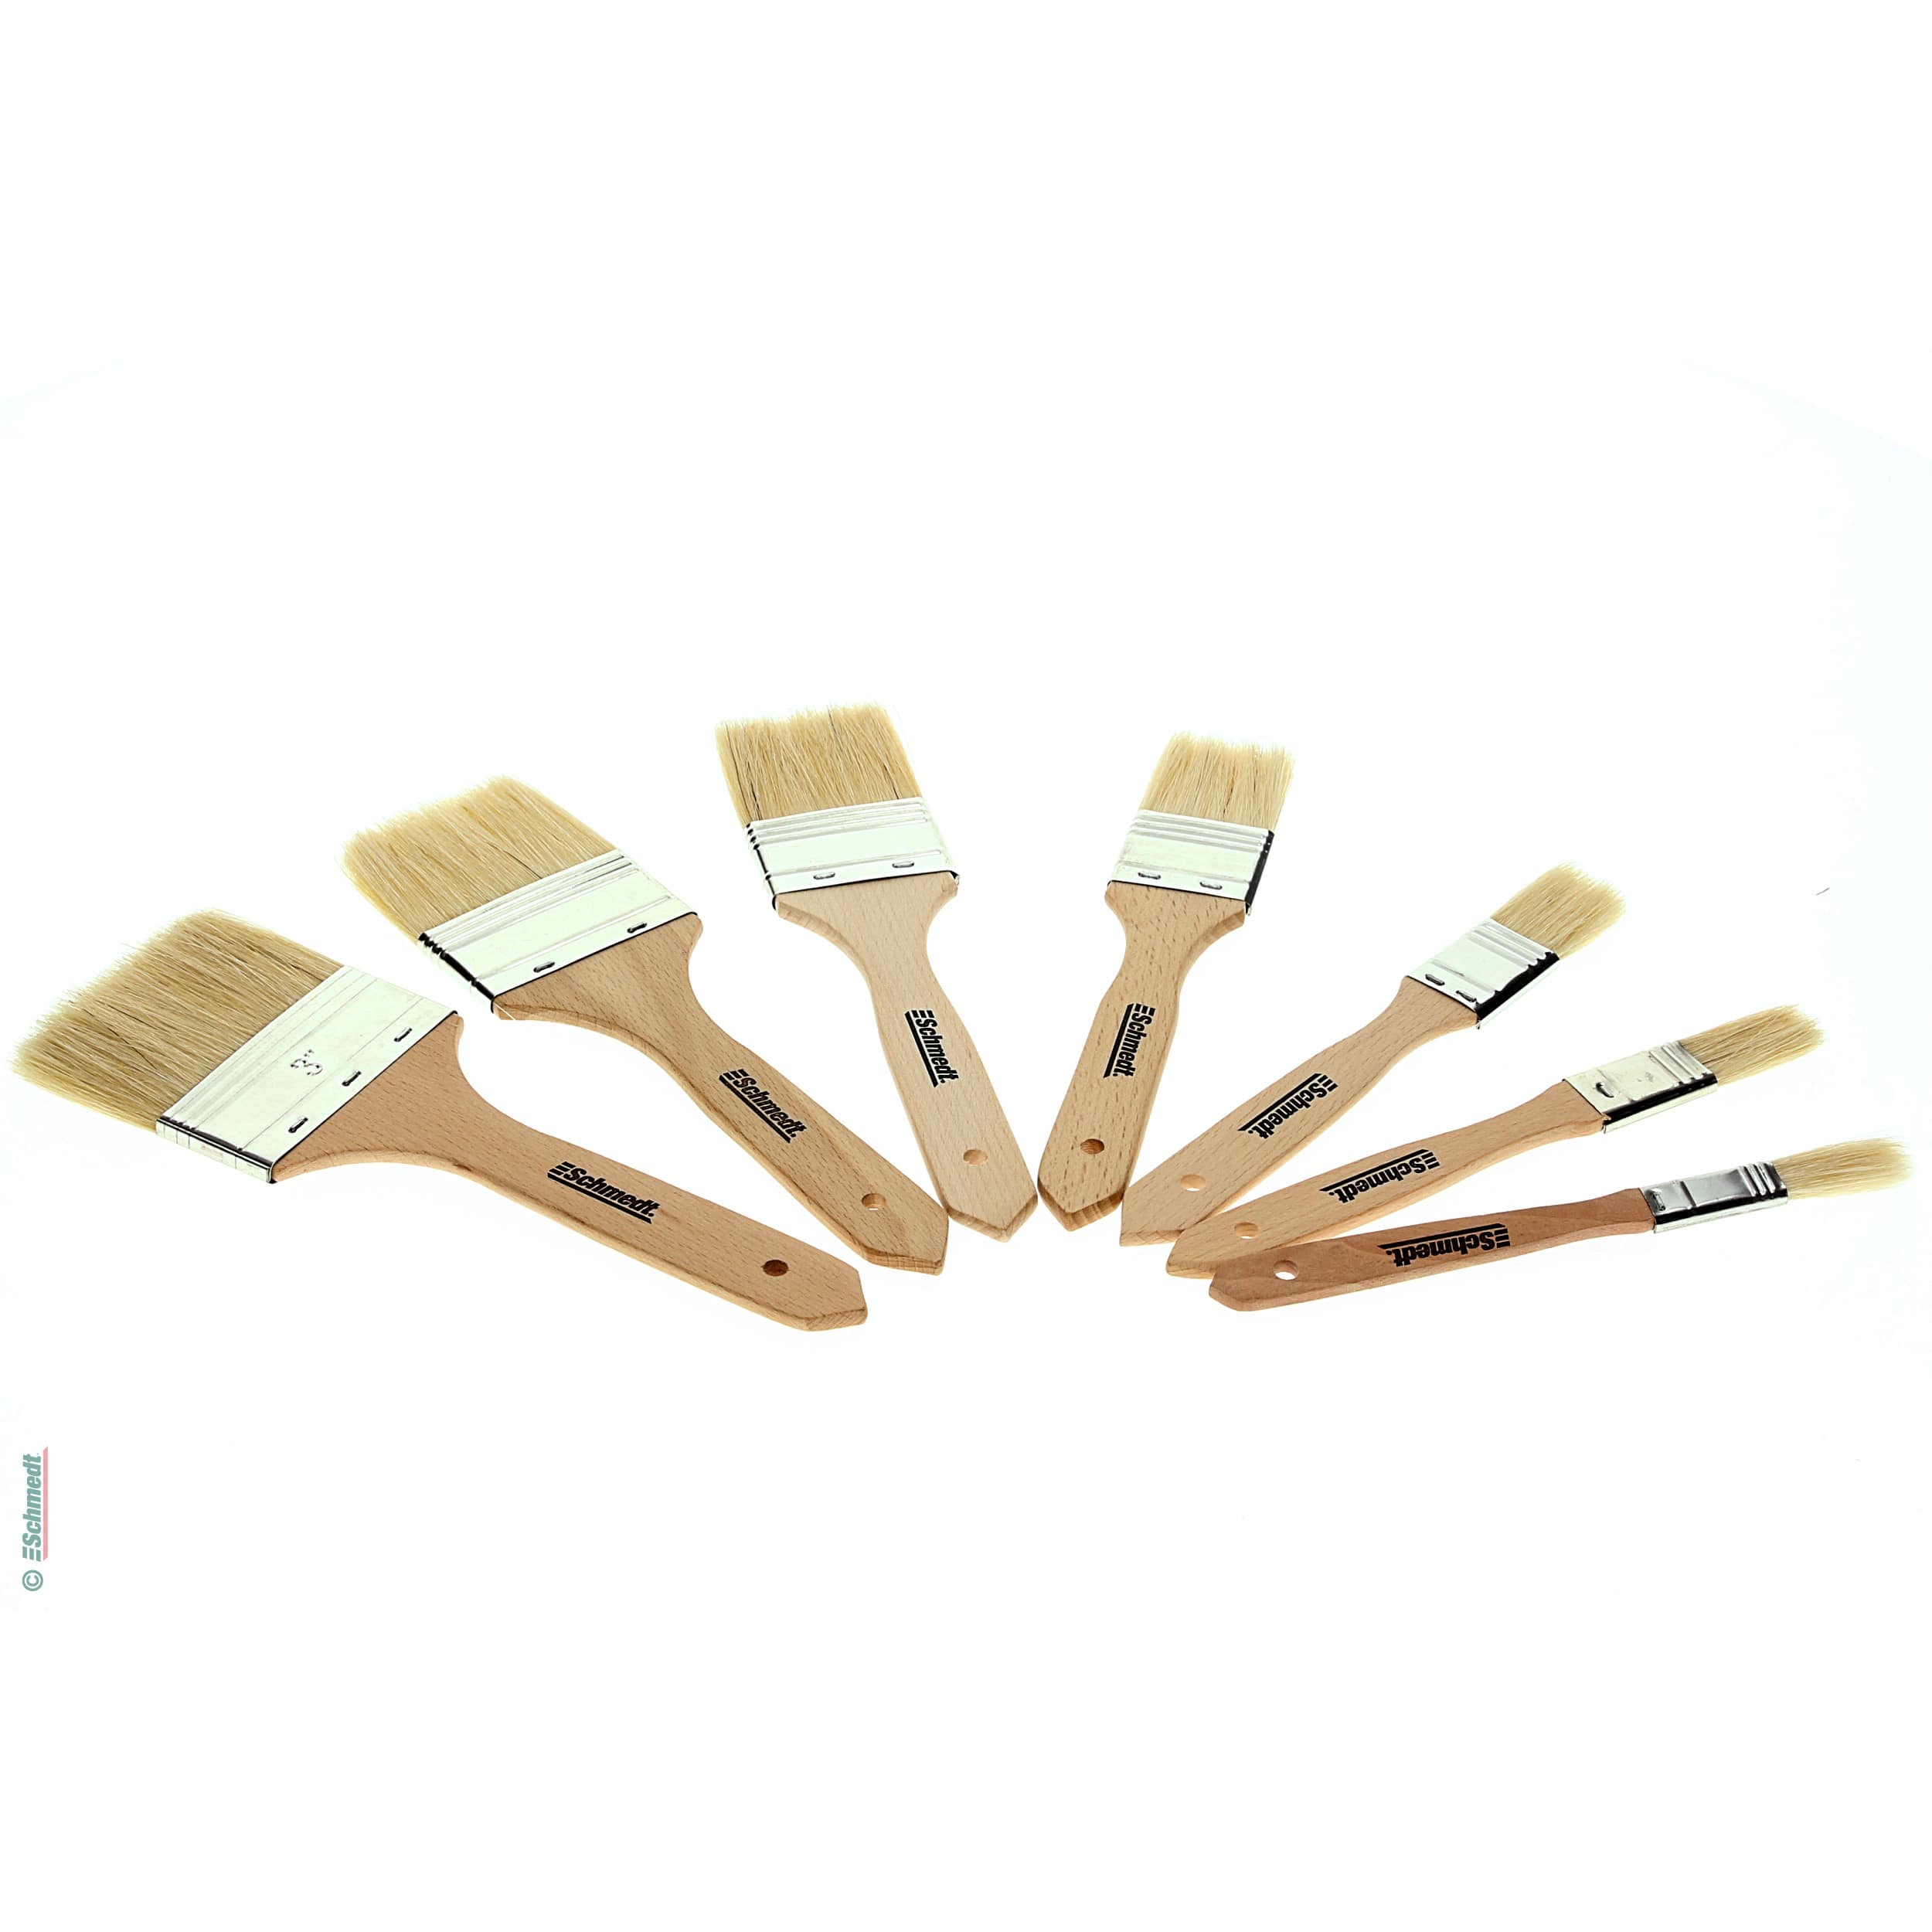  Glue Brush for Bookbinding, VENCINK Natural Bristle Wood Handle  Round Wax Paint Brush Small Brush for Little Craft Project